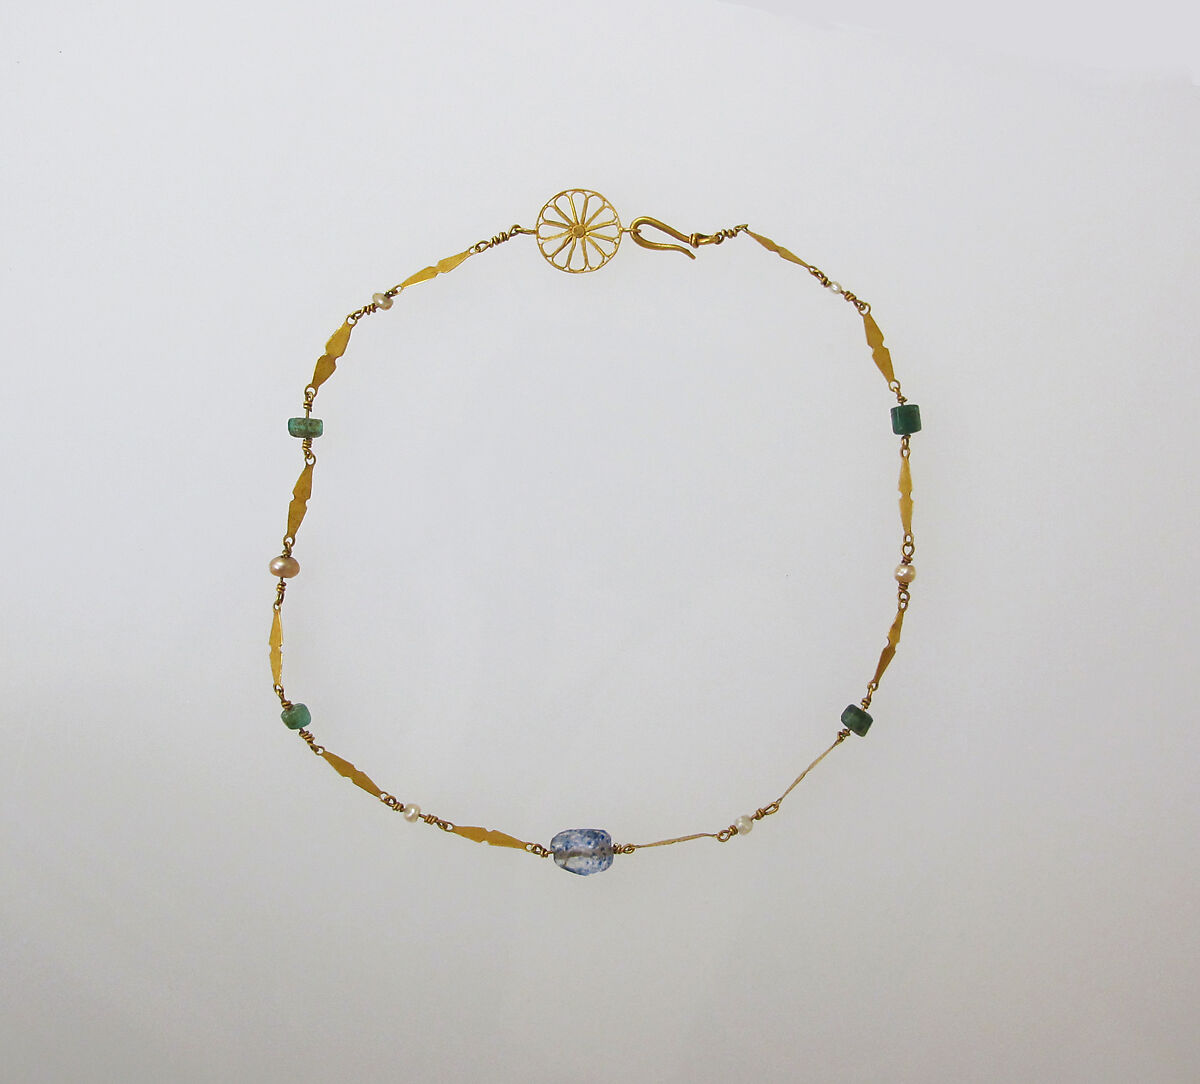 Necklace with pearls and beryl beads, Gold, pearl, beryl, Roman 